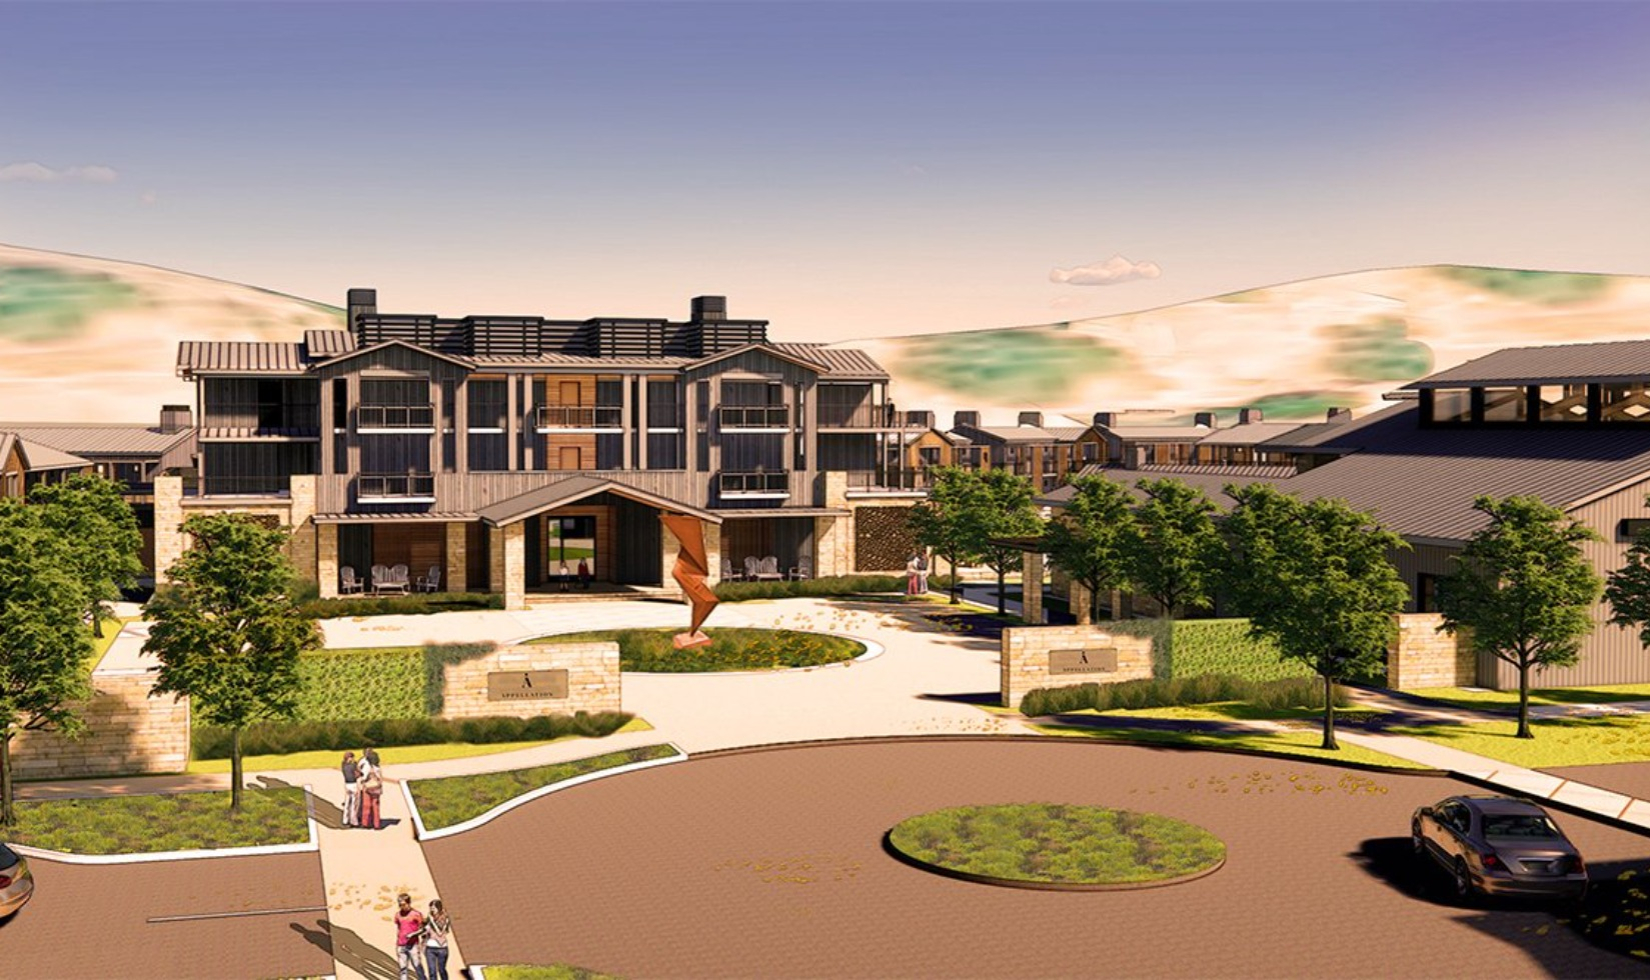 Digital rendering image depicting a modern luxurious hotel in front of cul-de-sac drive